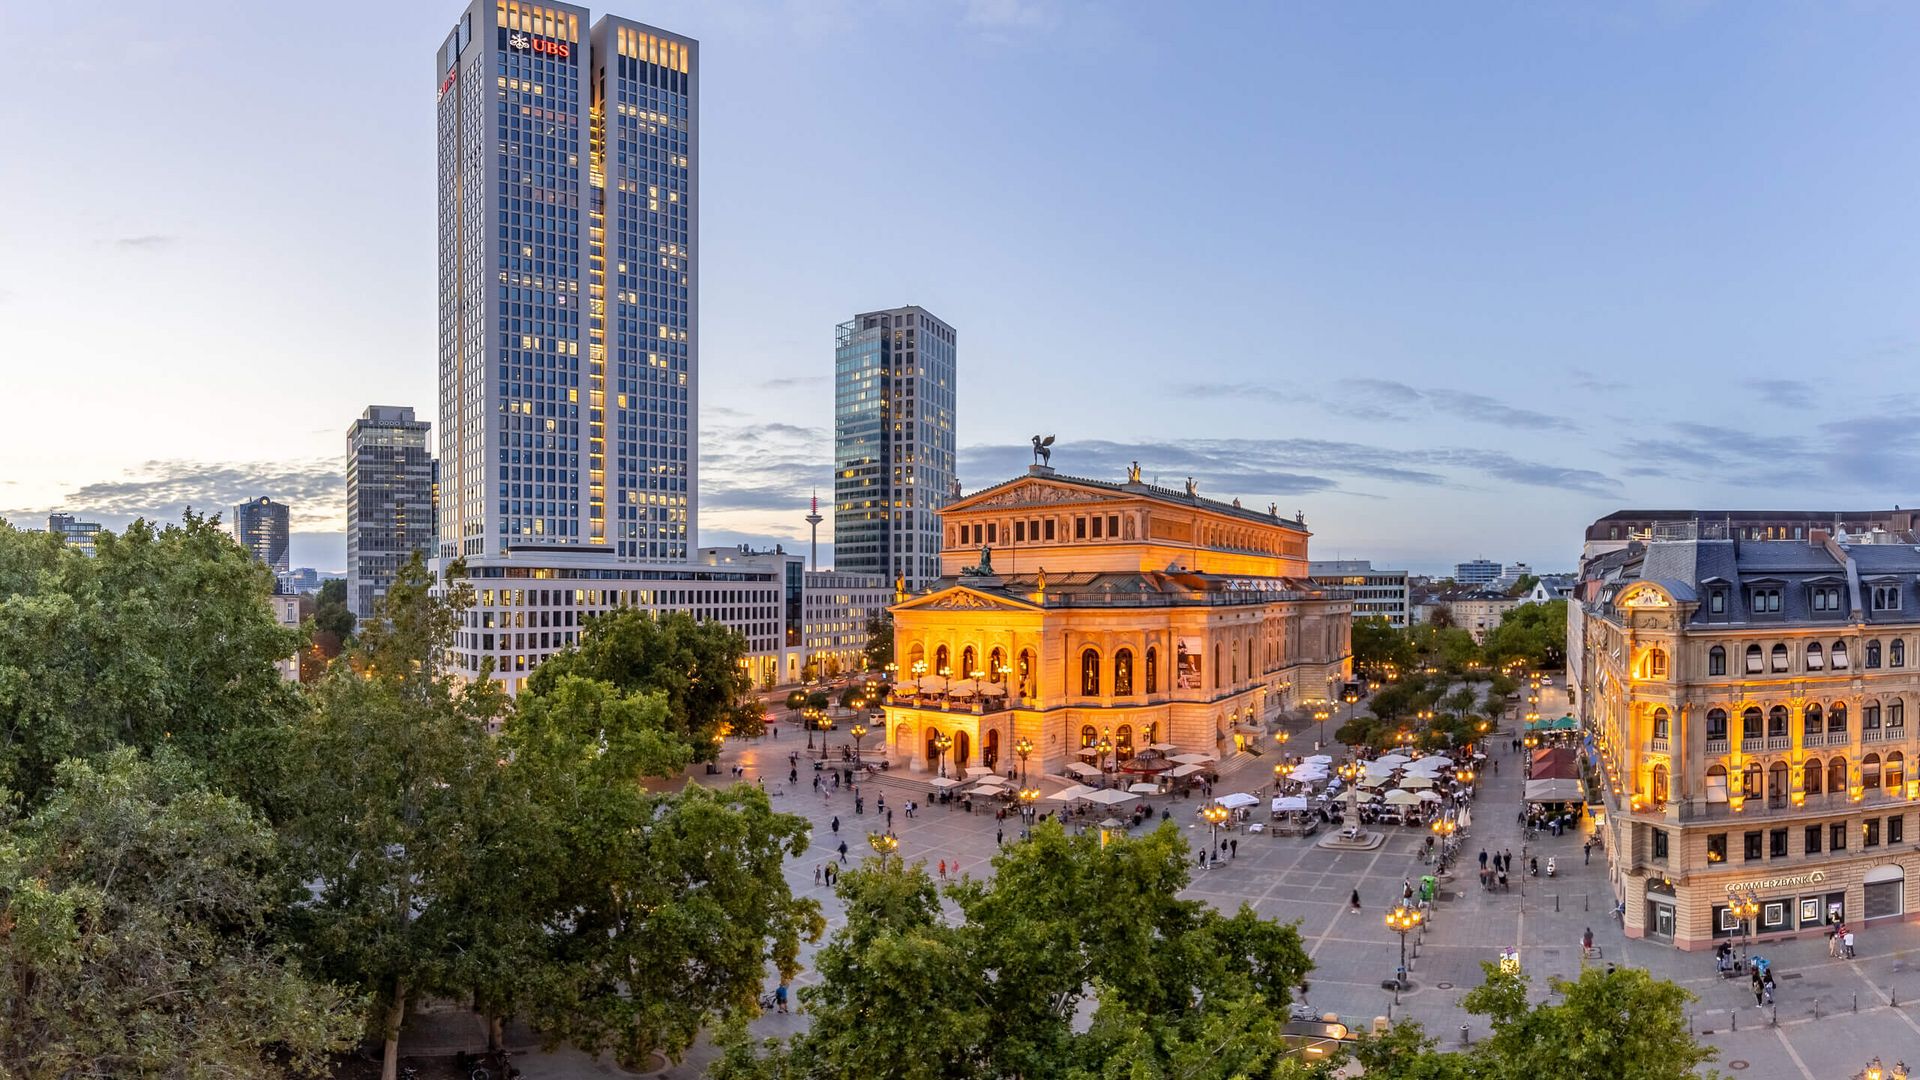 Panoramic image with Old Opera House, skyscraper and beautiful old buildings, lanterns bathe the square in yellow light, evening atmosphere.